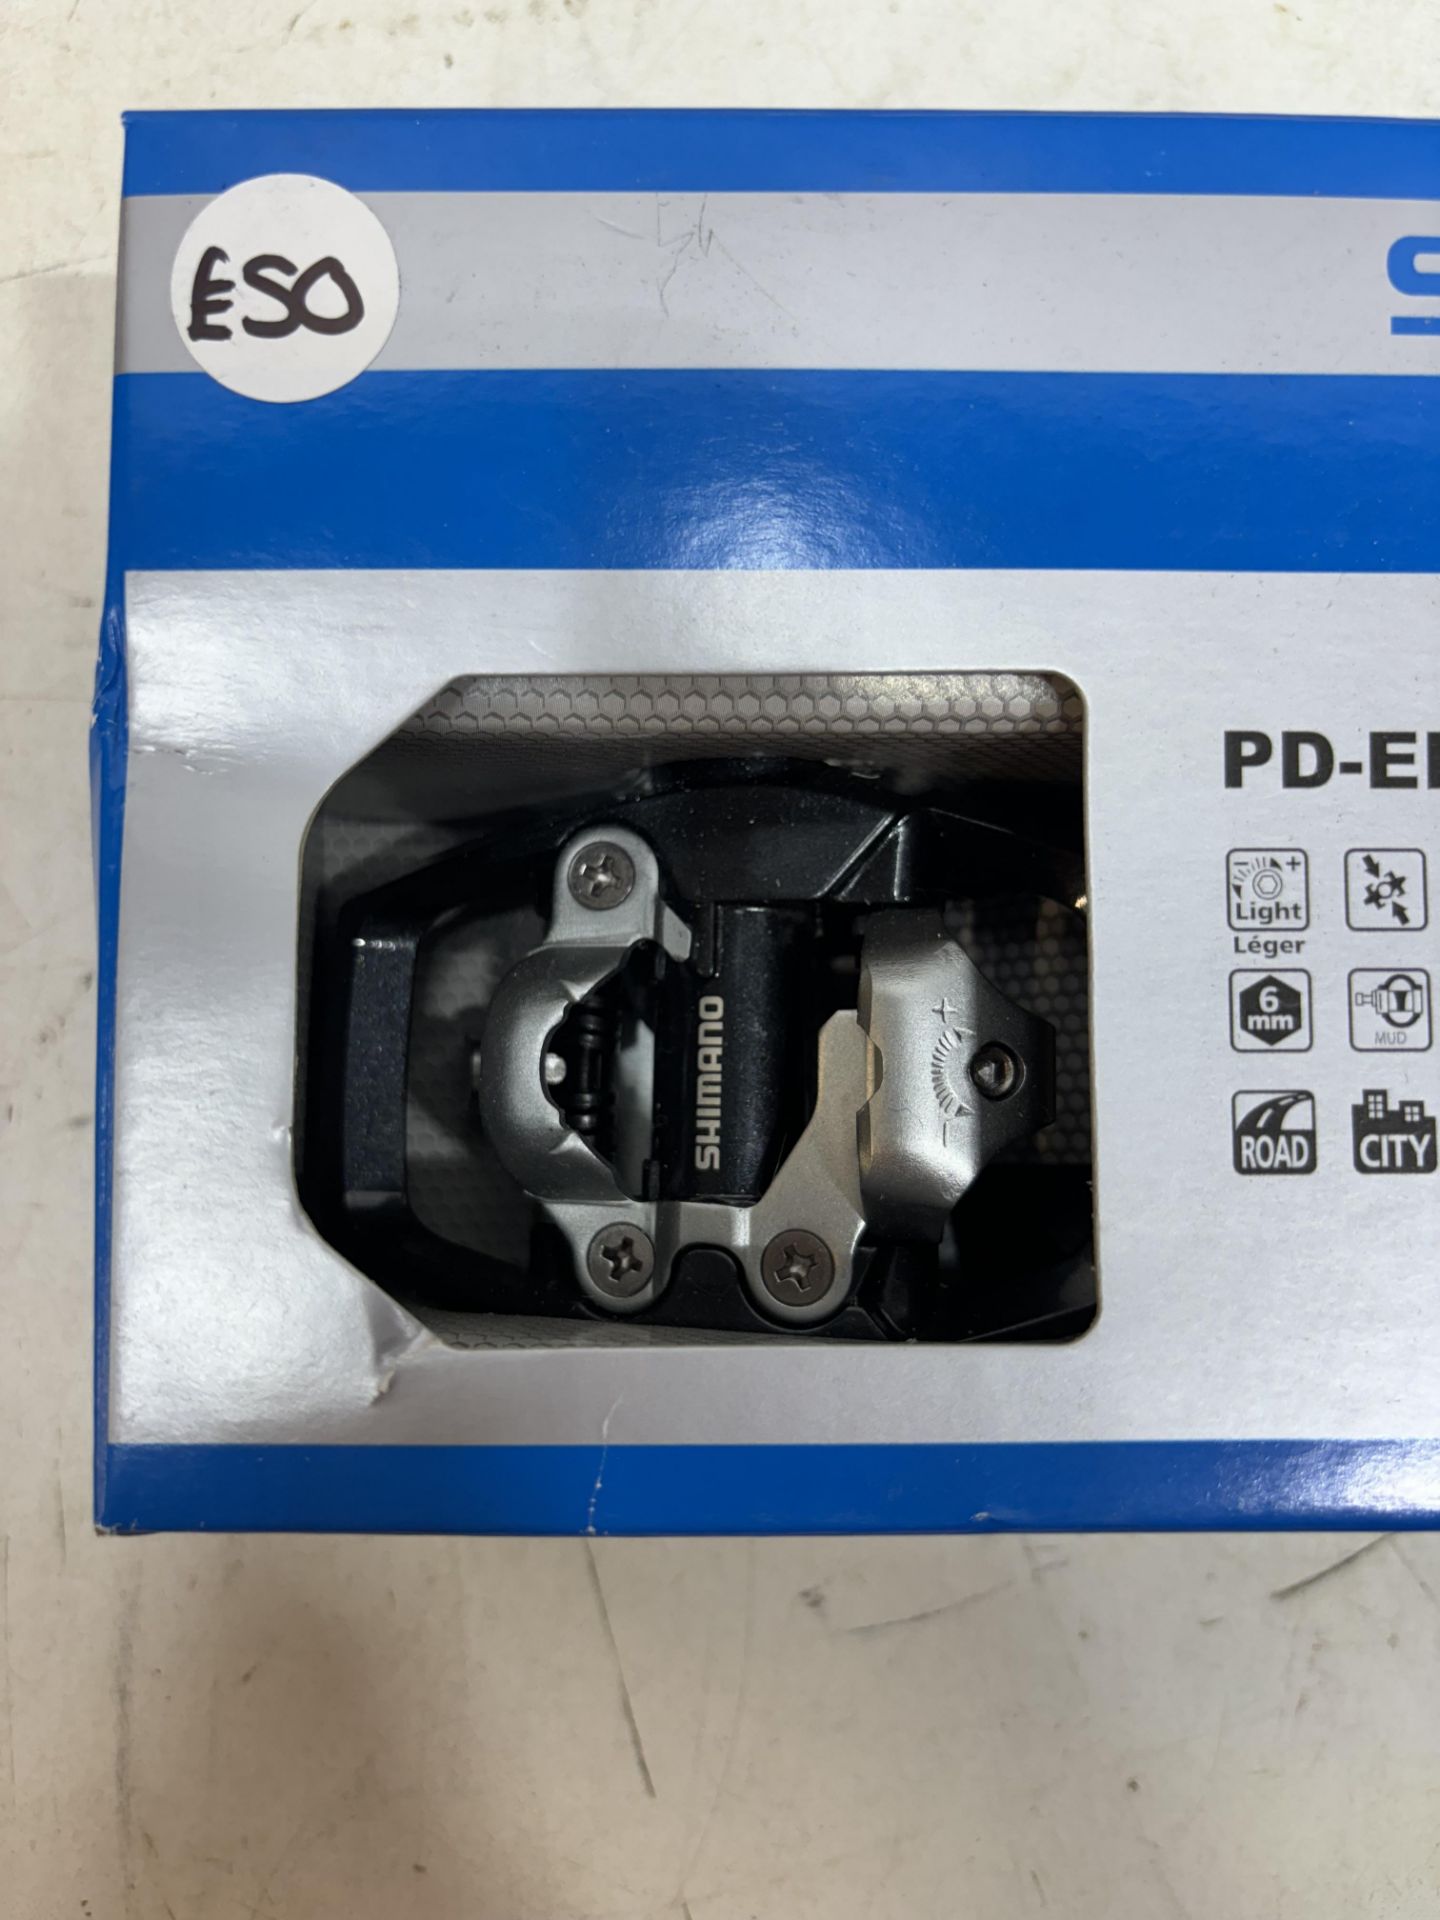 SHIMANO PD-ED500 Spd Road Pedals - Image 6 of 6